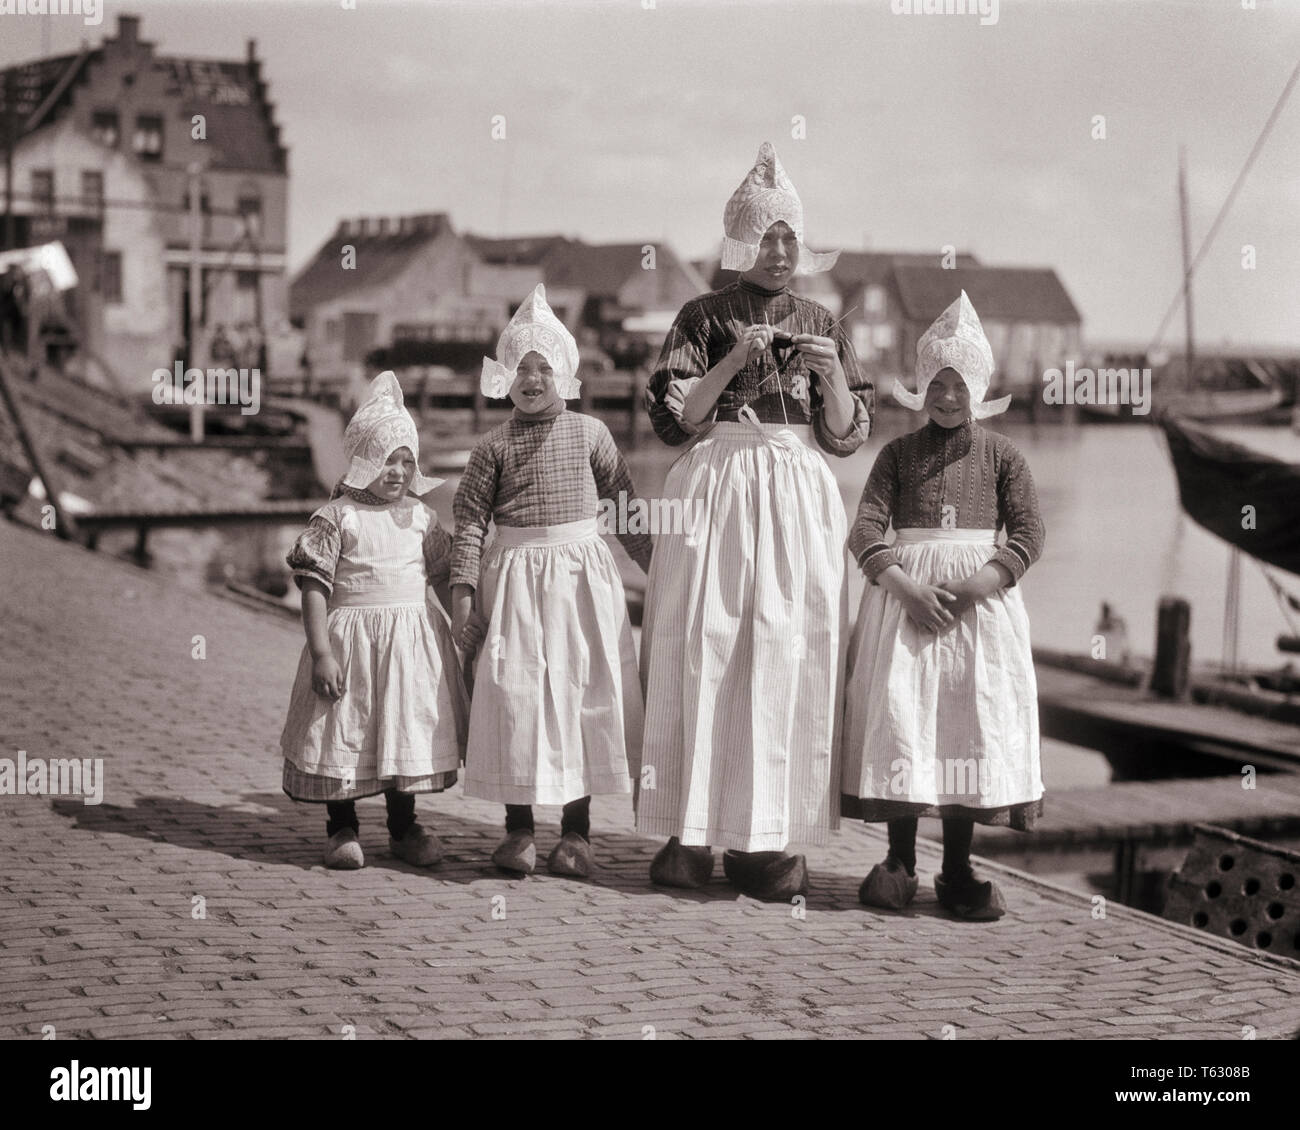 1920s MOTHER AND THREE DAUGHTERS TYPICAL DUTCH COSTUMES LOOKING AT CAMERA WOODEN SHOES APRONS LACE CAPS VOLENDAM HARBOR HOLLAND - r3730 HAR001 HARS NOSTALGIA OLD FASHION SISTER 1 JUVENILE STYLE LIFESTYLE HISTORY CELEBRATION FEMALES HOME LIFE COPY SPACE FULL-LENGTH LADIES DAUGHTERS PERSONS TRADITIONAL SIBLINGS DUTCH SISTERS APRONS B&W HARBOR EYE CONTACT AND PRIDE SIBLING HOLLAND CONCEPTUAL CAPS STYLISH JUVENILES MID-ADULT MID-ADULT WOMAN MOMS TOGETHERNESS TYPICAL BLACK AND WHITE CAUCASIAN ETHNICITY HAR001 OLD FASHIONED Stock Photo